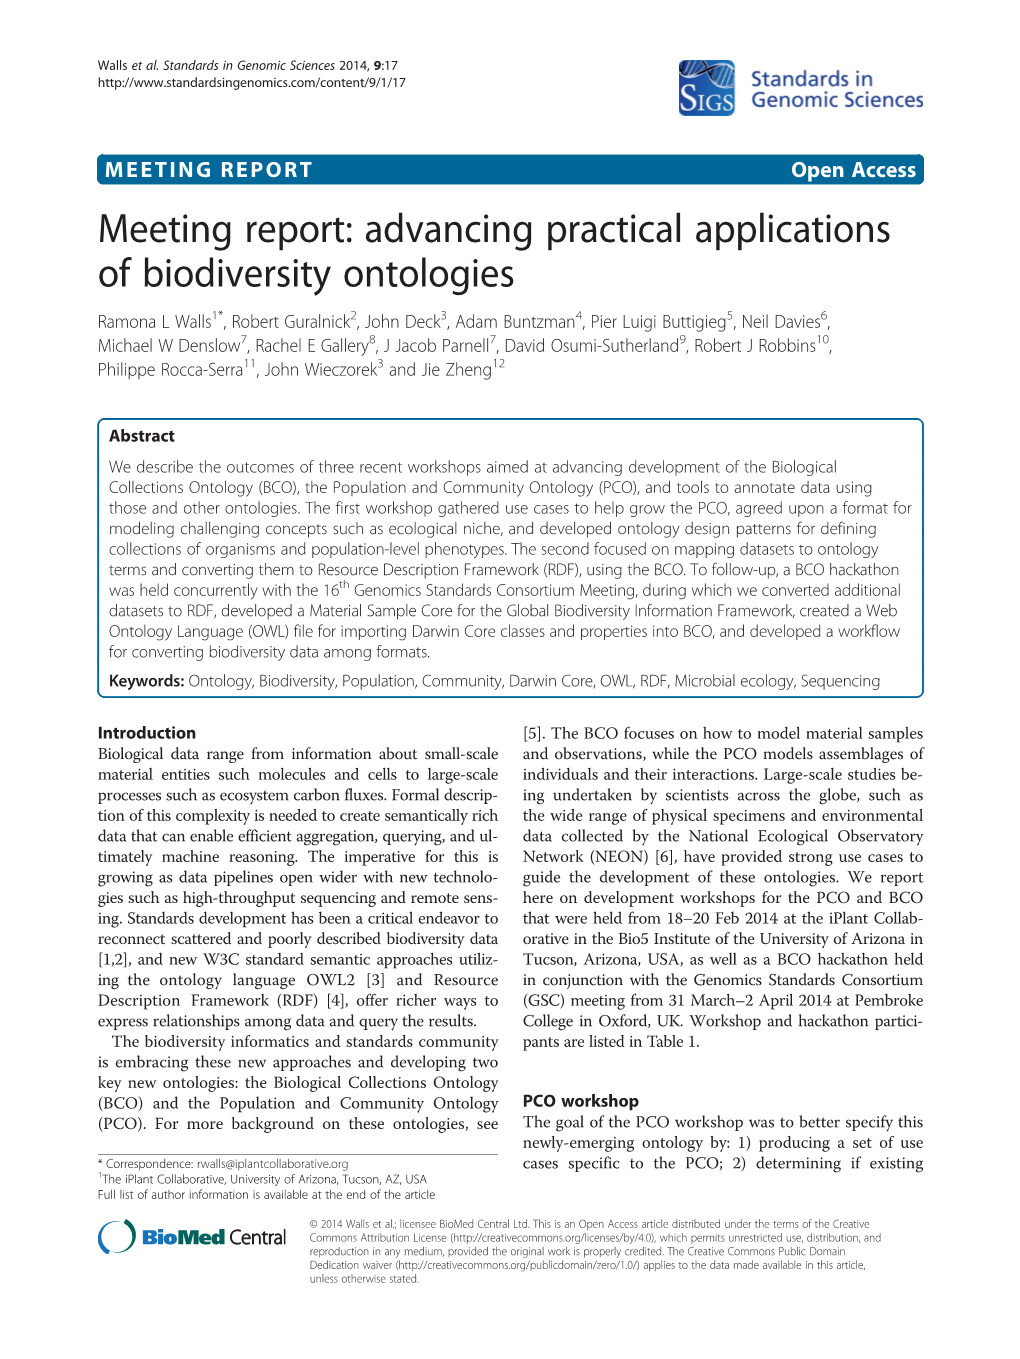 Meeting Report: Advancing Practical Applications Of